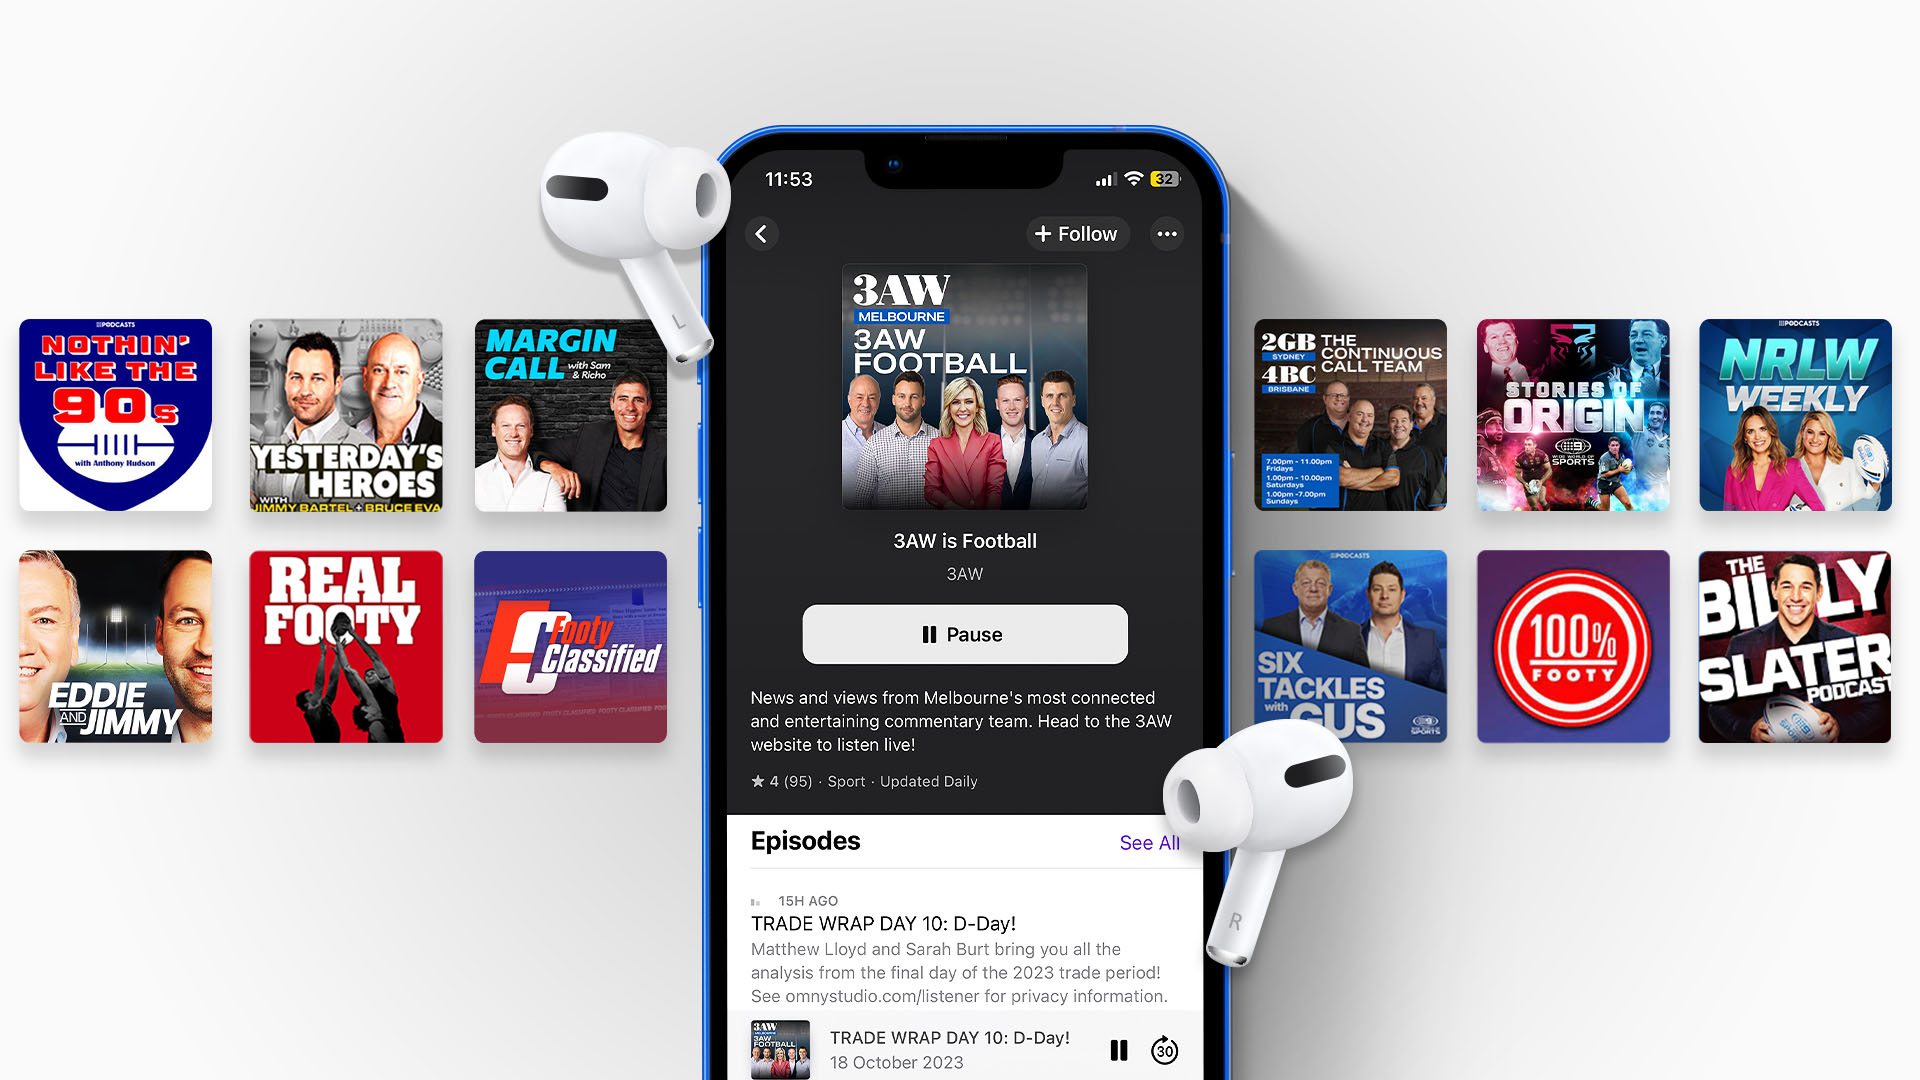 9Podcasts listeners score with growing sport slate